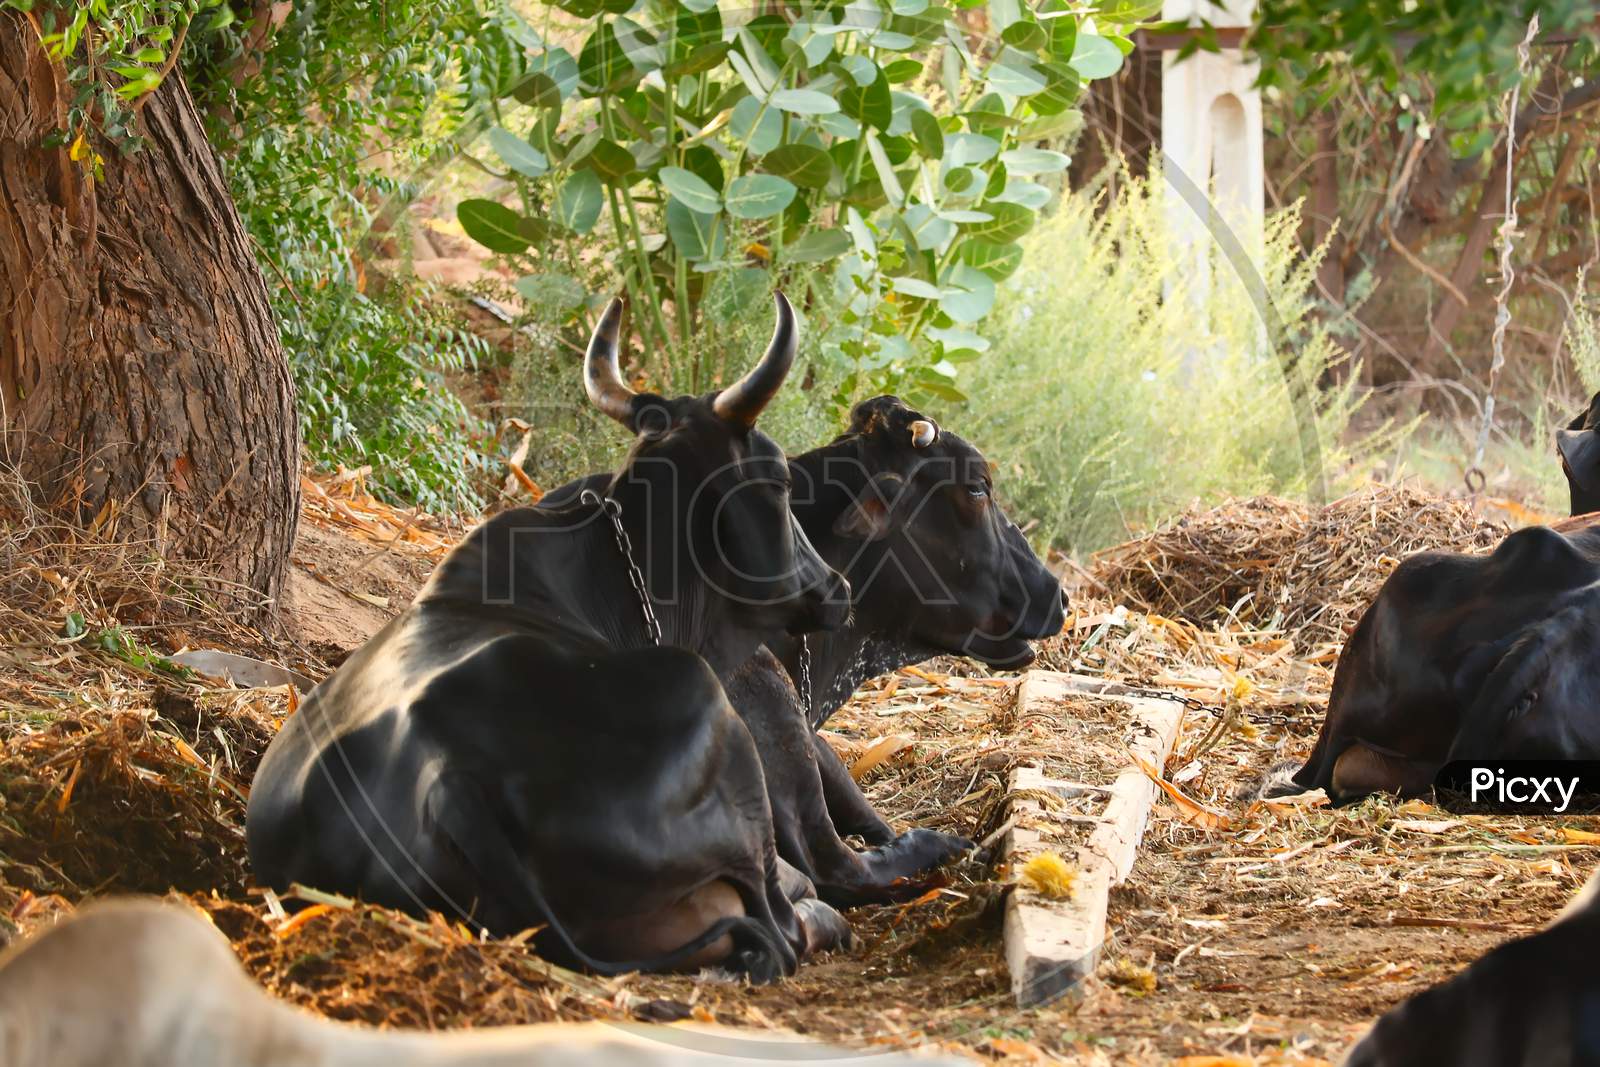 Indian Countryside With Black Buffalo And Cow In Farm,Cattle Shed Rural India,Water Buffalo Resting In Farm